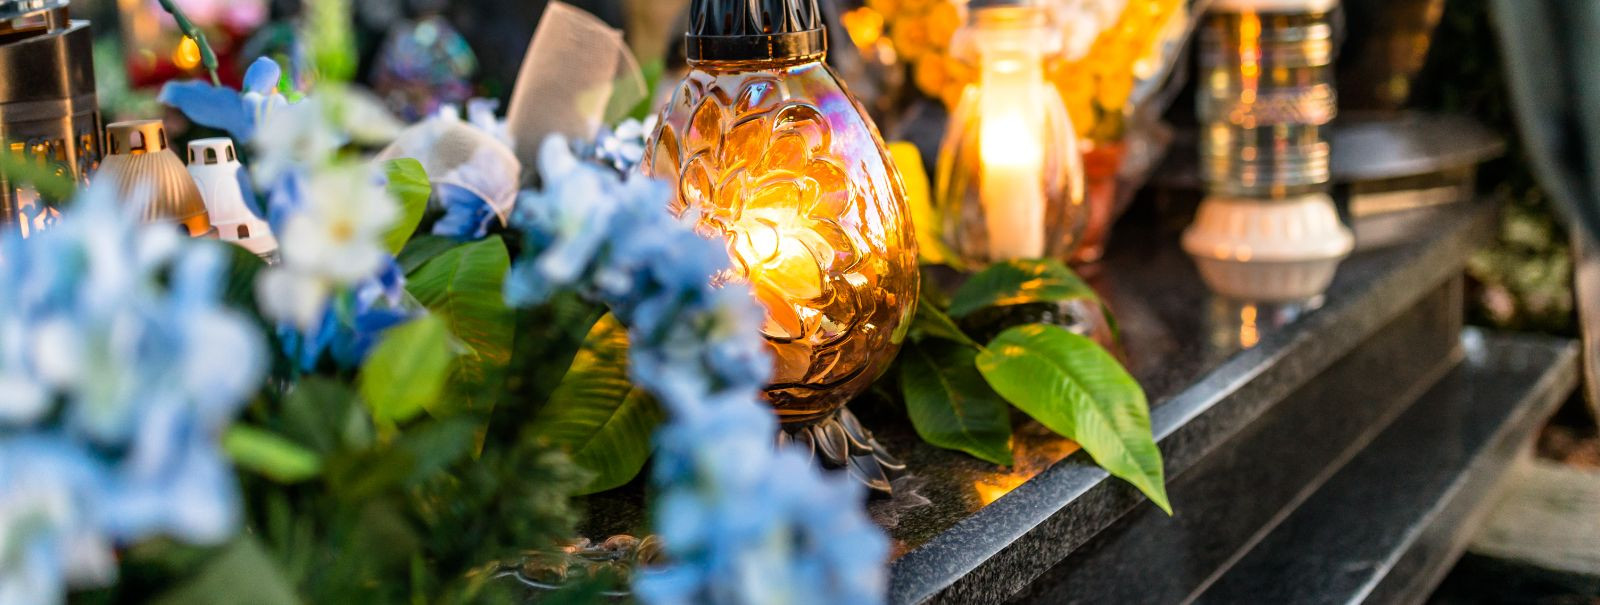 Choosing the right flowers for a loved one's gravesite is a thoughtful gesture that honors their memory through the changing seasons. Flowers can convey a range